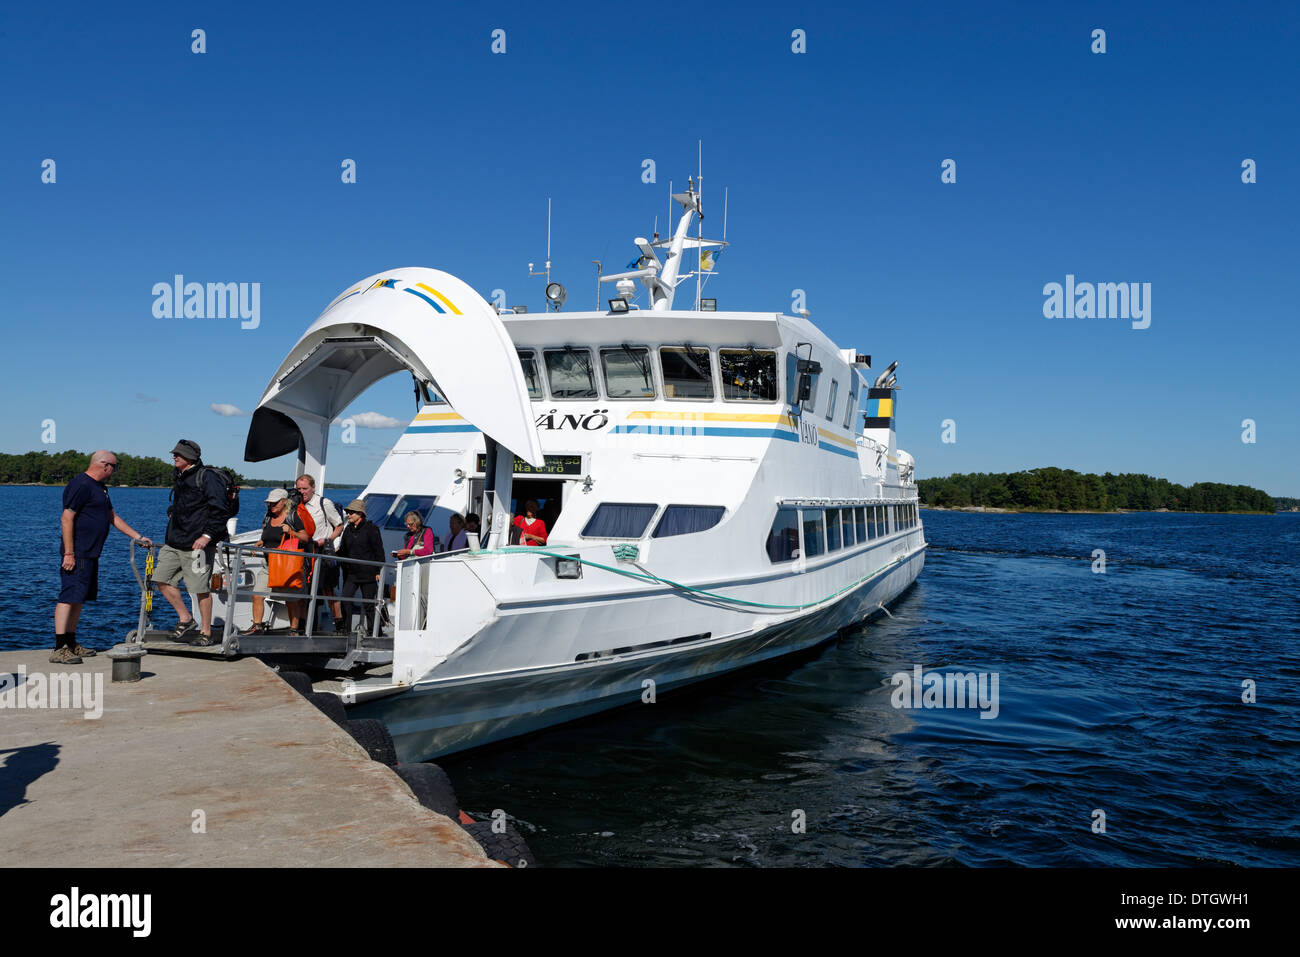 Jetty with the ferry from Waxholmsbolaget, Finnhamn Island in the central Stockholm archipelago, Stockholm, Sweden Stock Photo